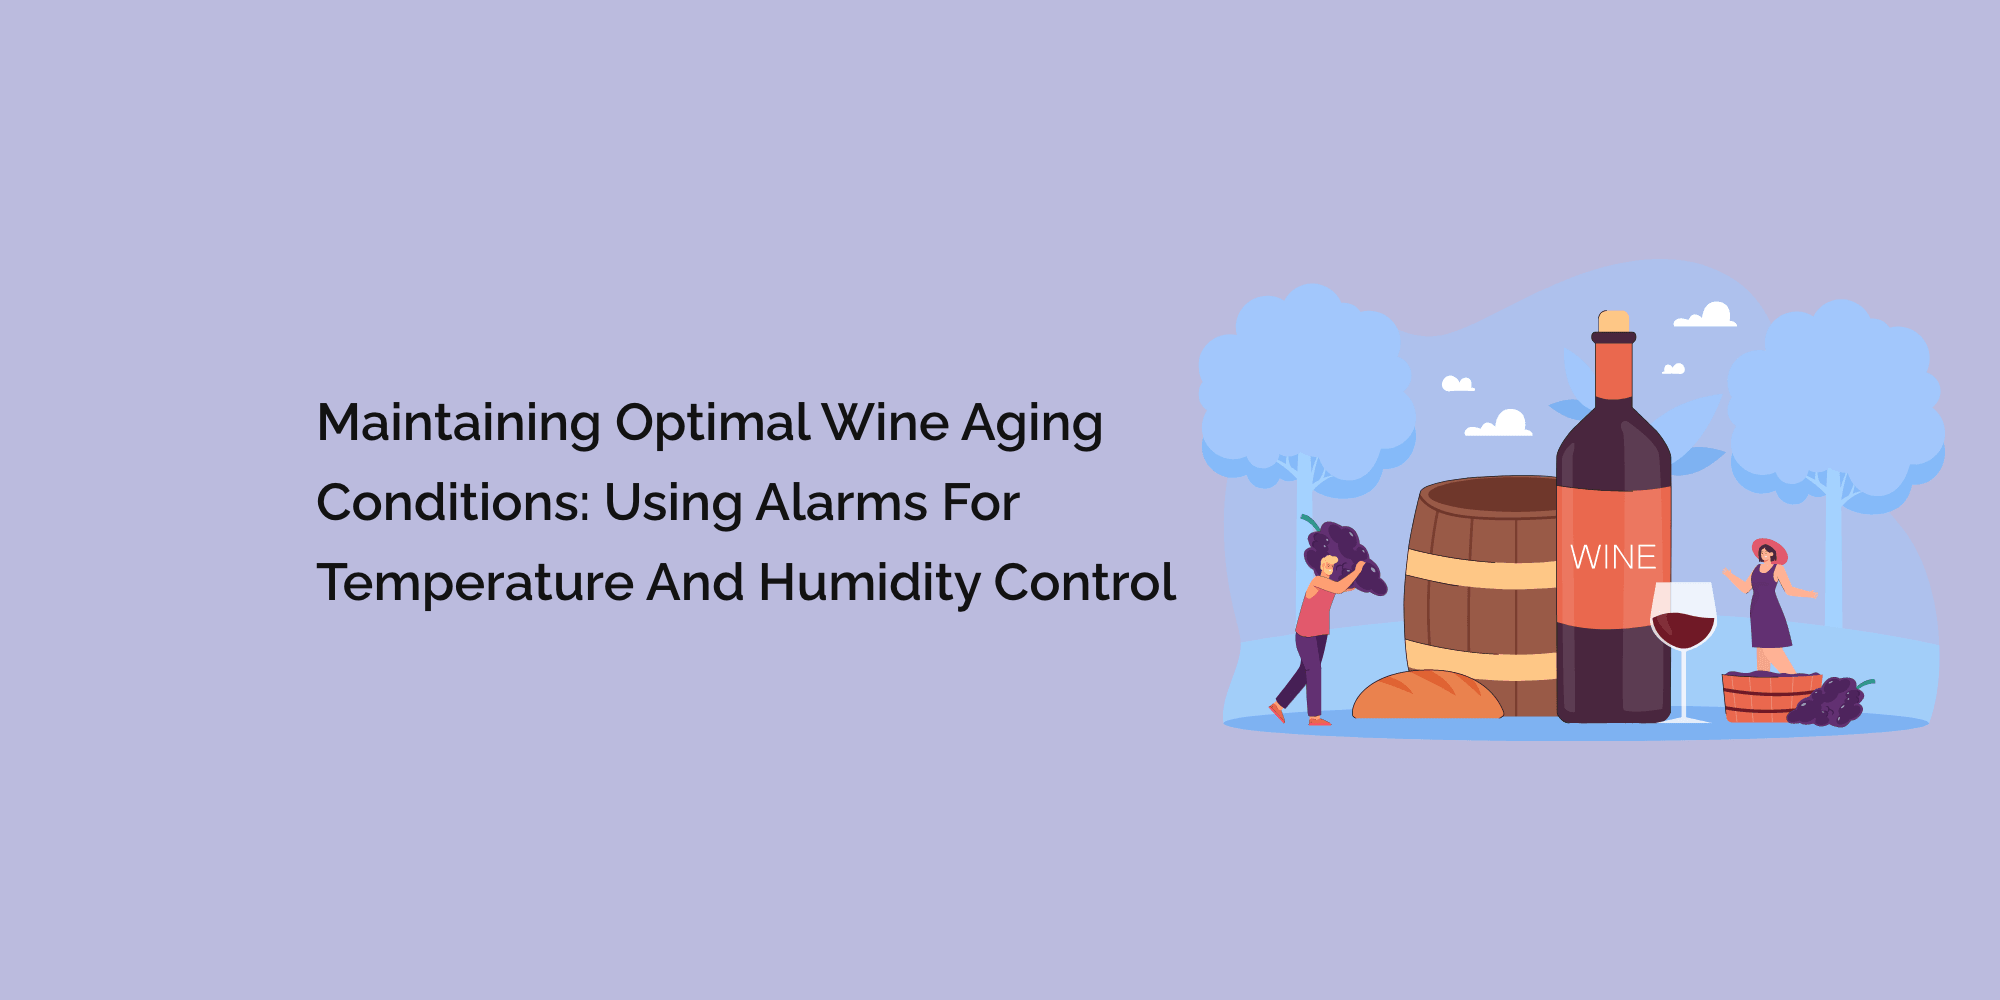 Maintaining Optimal Wine Aging Conditions: Using Alarms for Temperature and Humidity Control